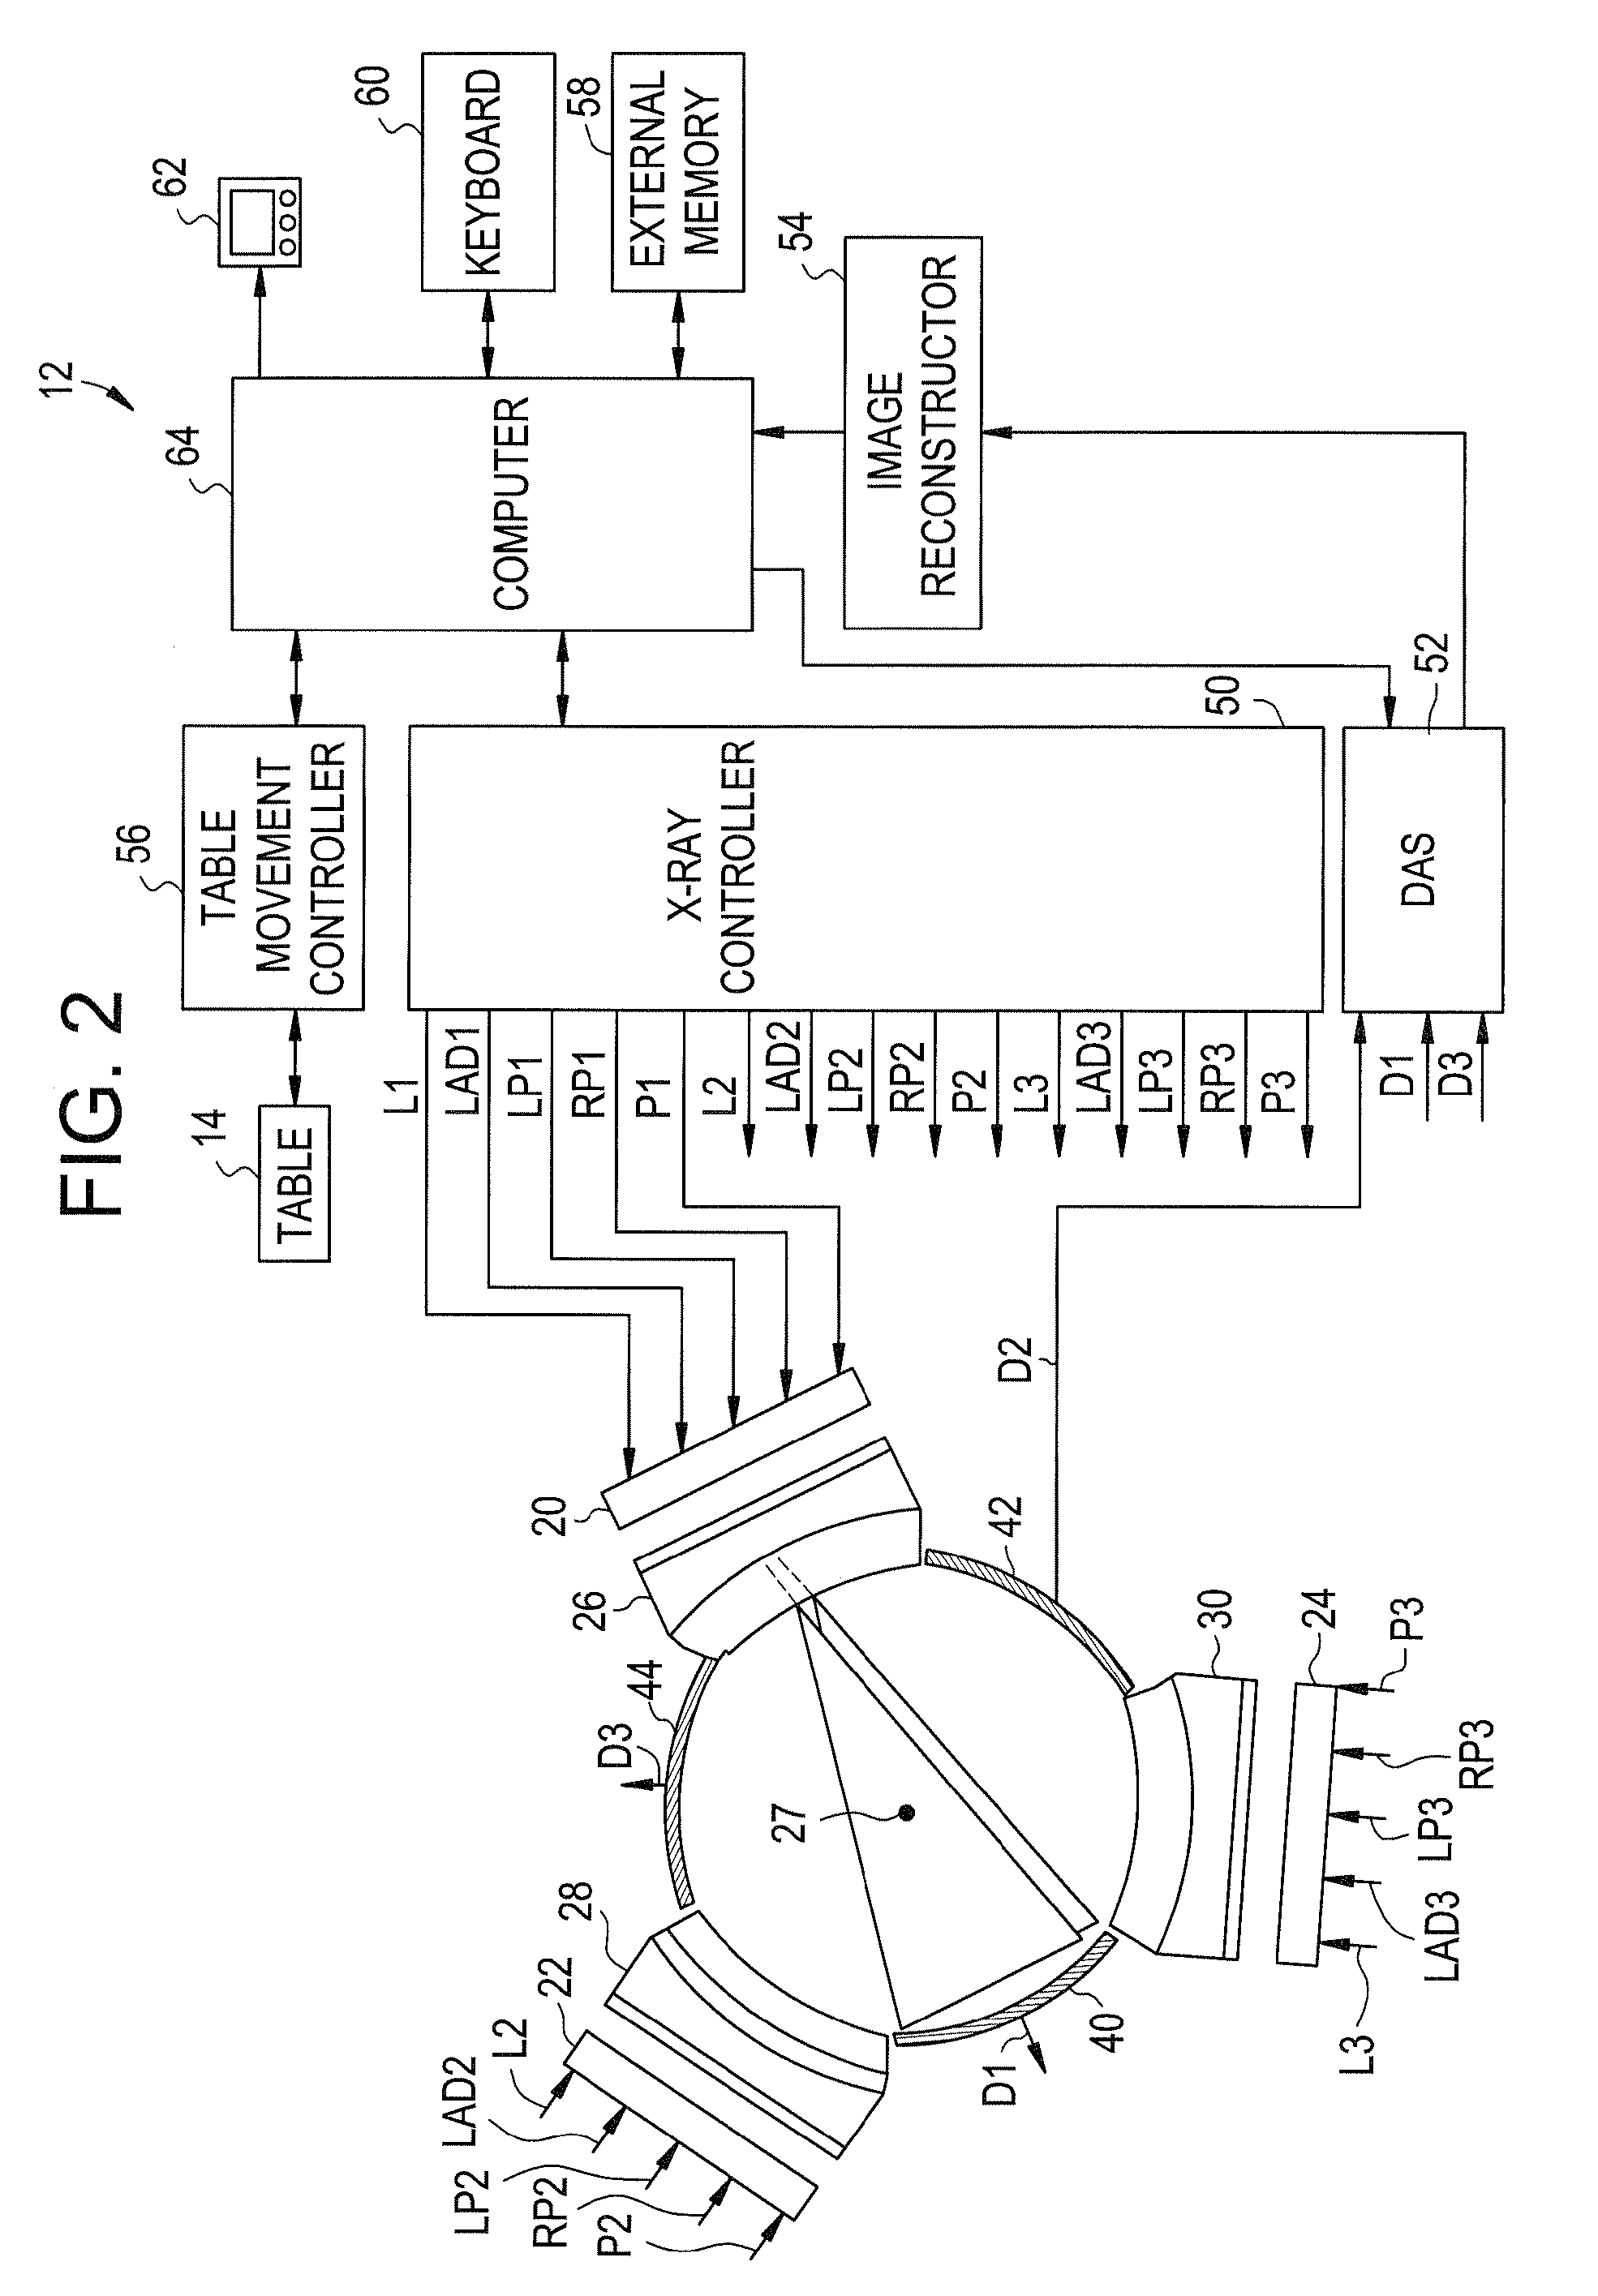 Electron emitter assembly and method for adjusting a power level of electron beams